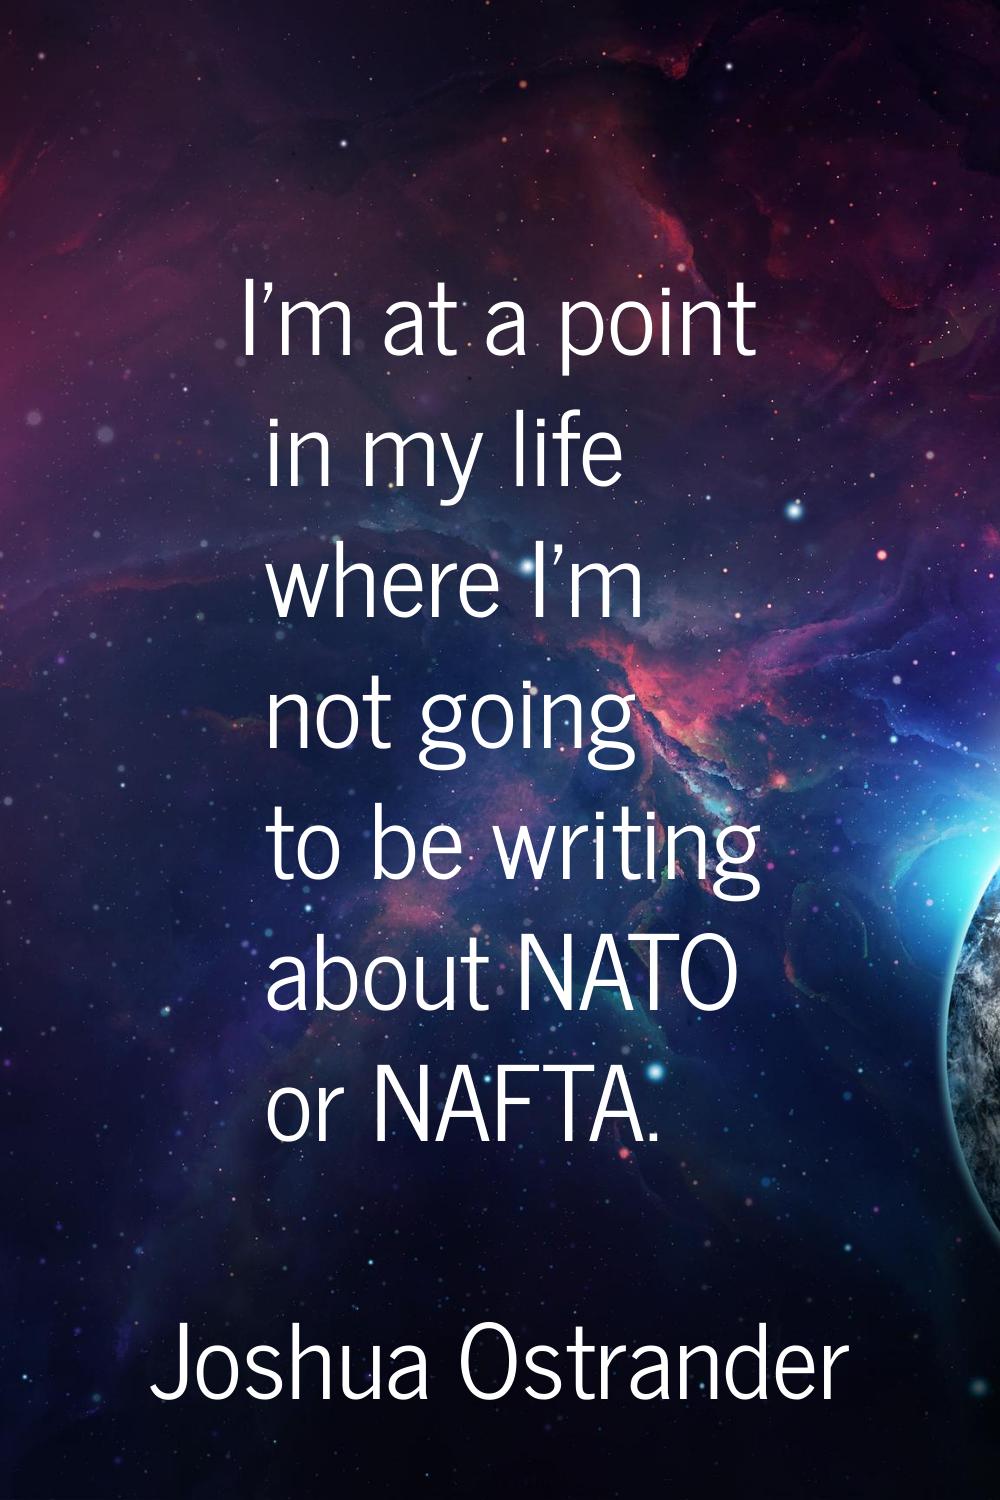 I'm at a point in my life where I'm not going to be writing about NATO or NAFTA.